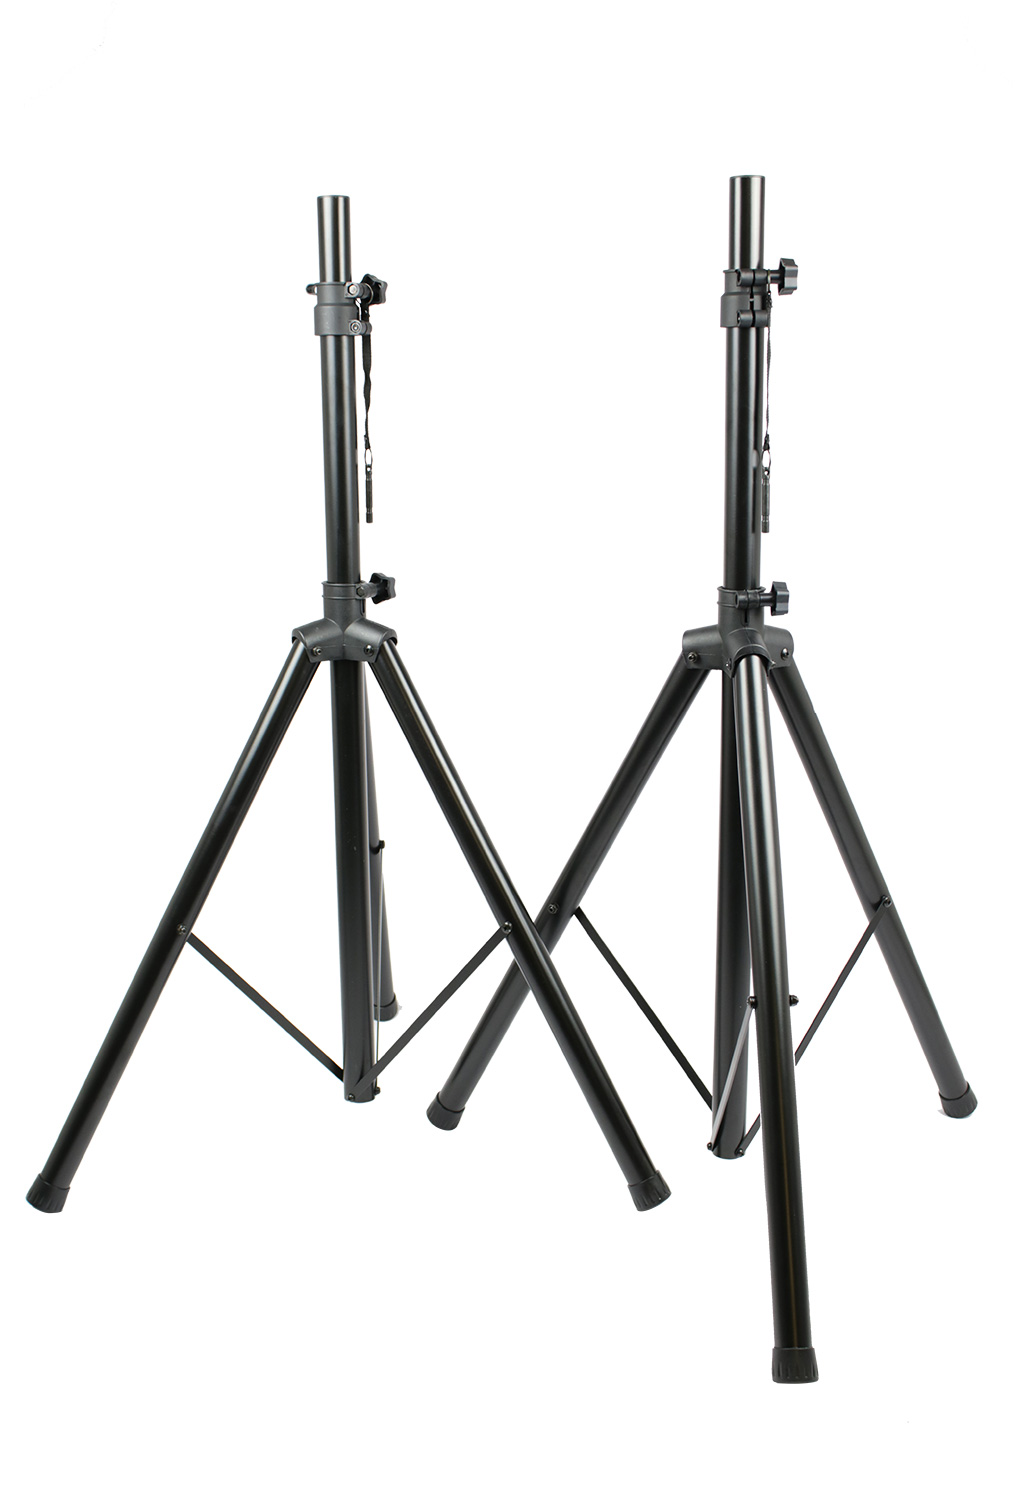 An image of TOURTECH PA Speaker Stands with Carry Bag - Gift for a Musician | PMT Online